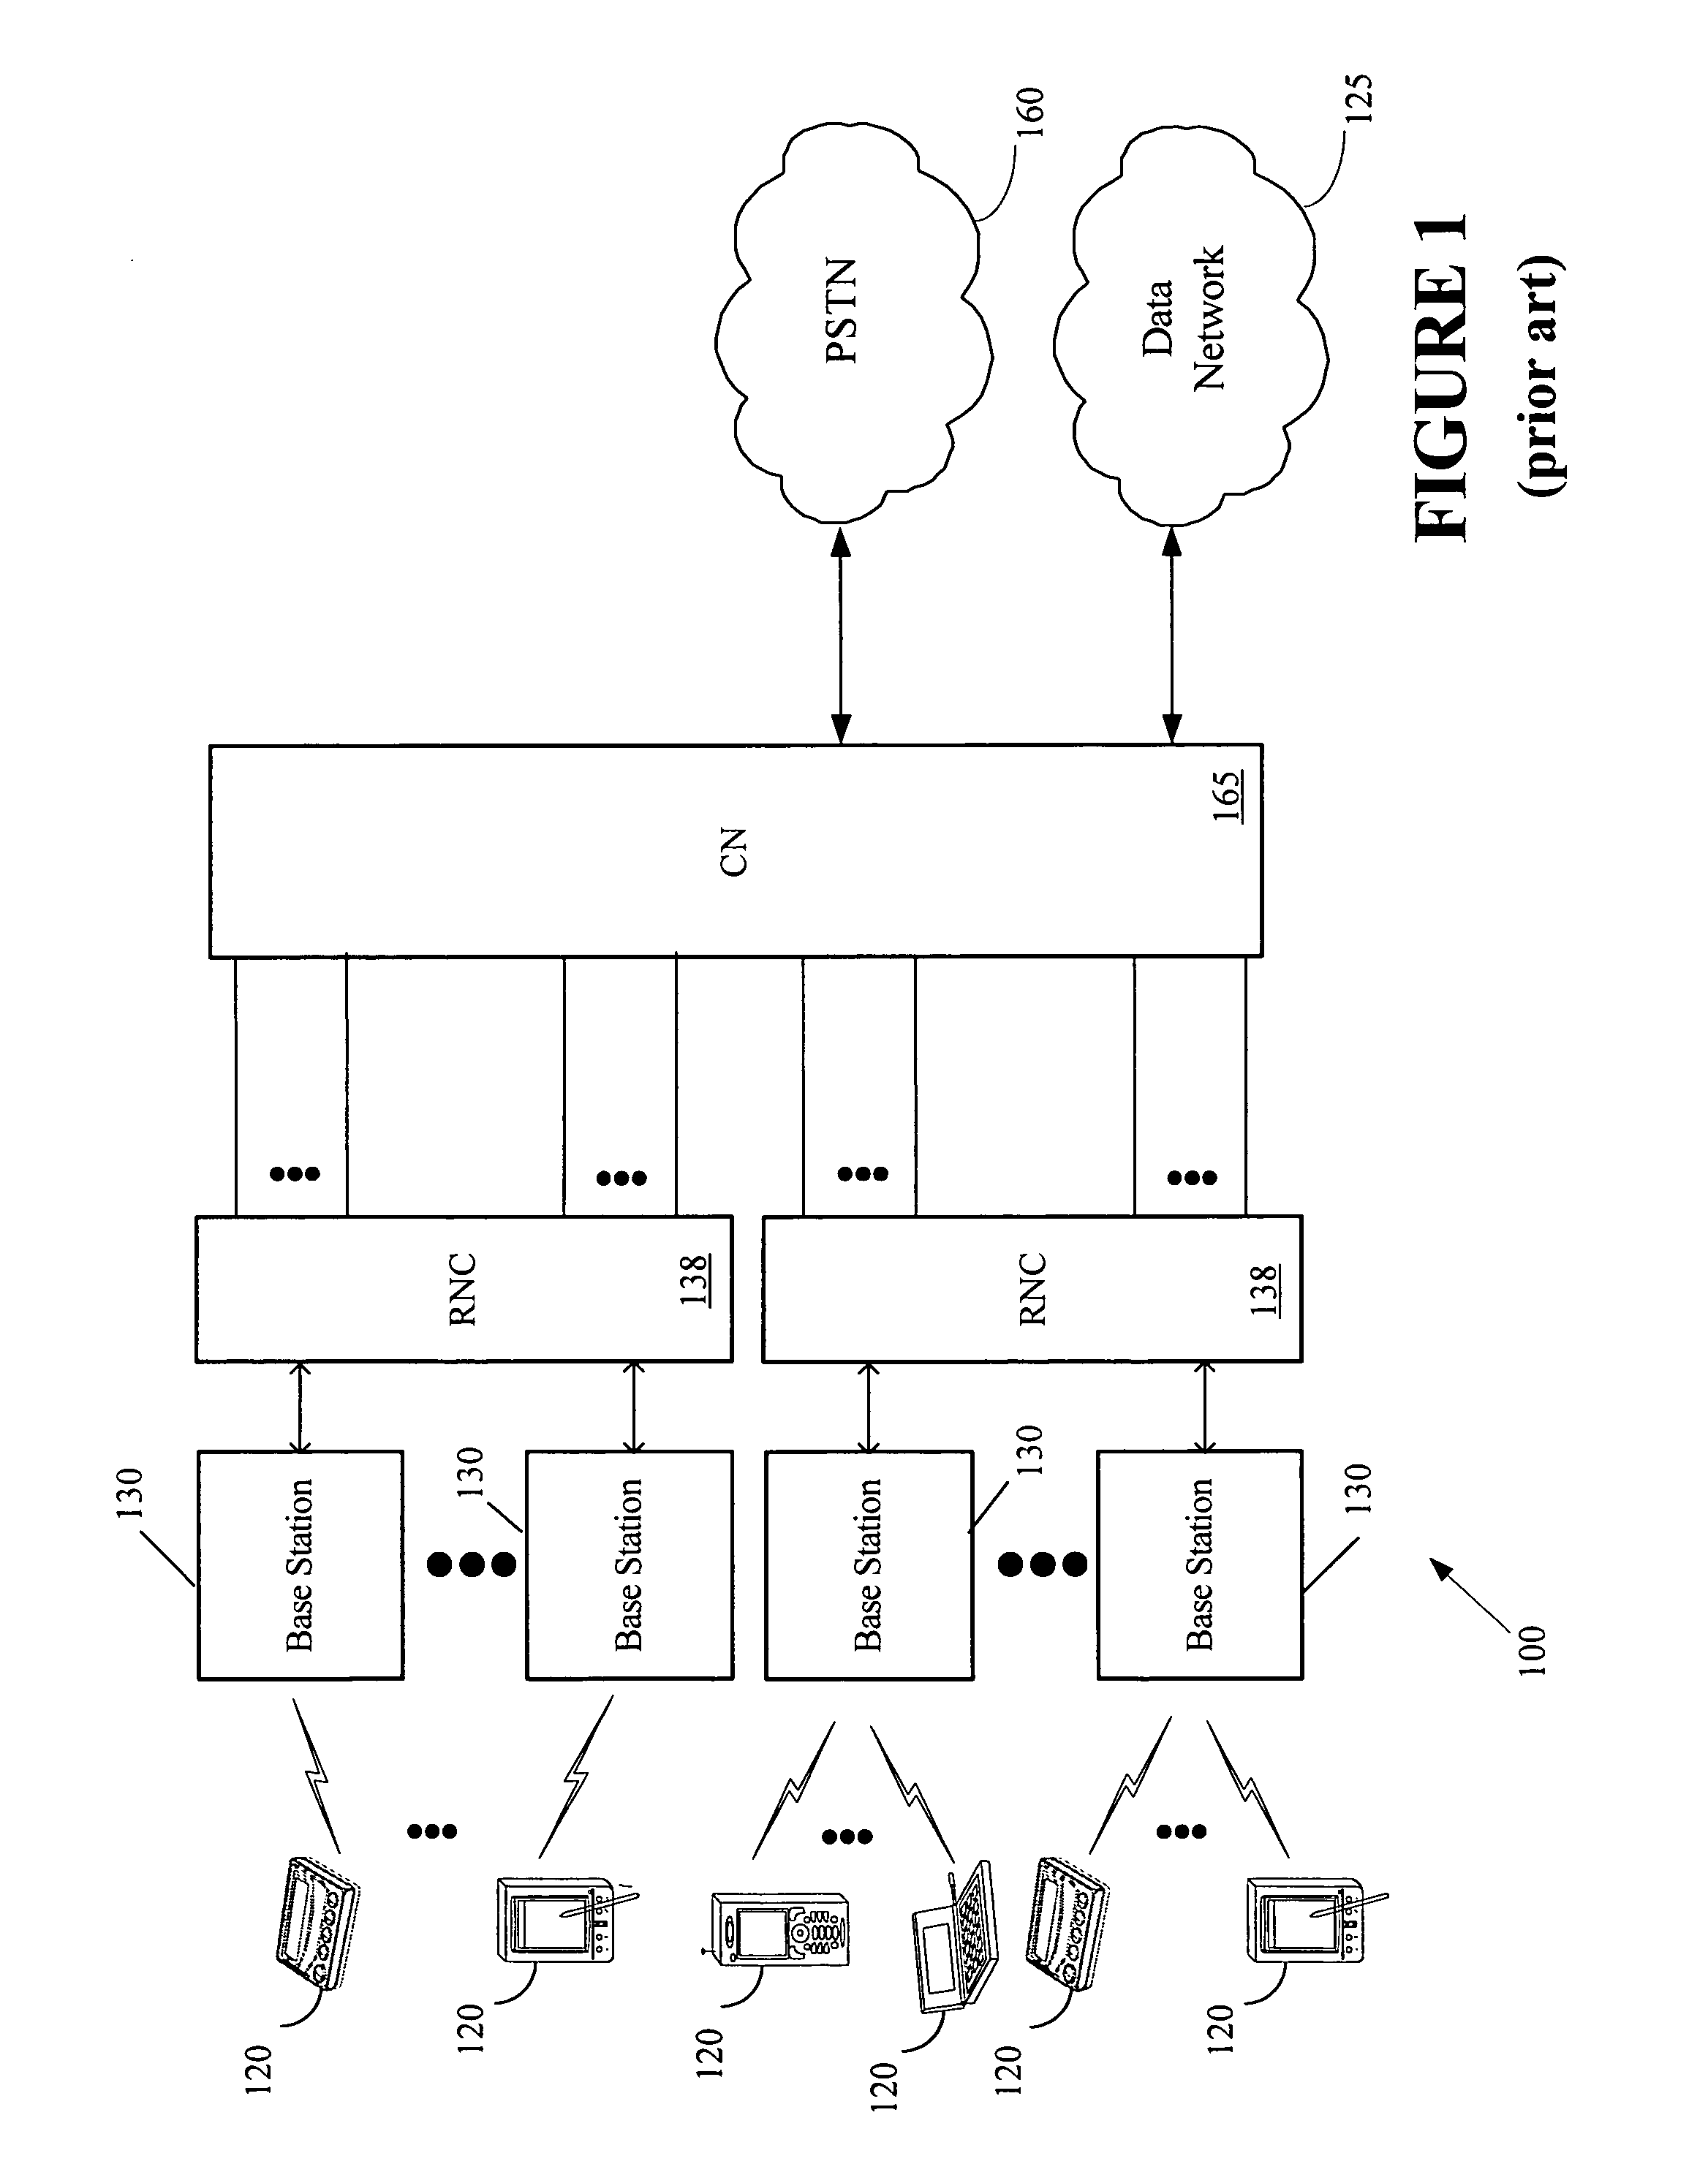 Method for controlling radio communications during idle periods in a wireless system